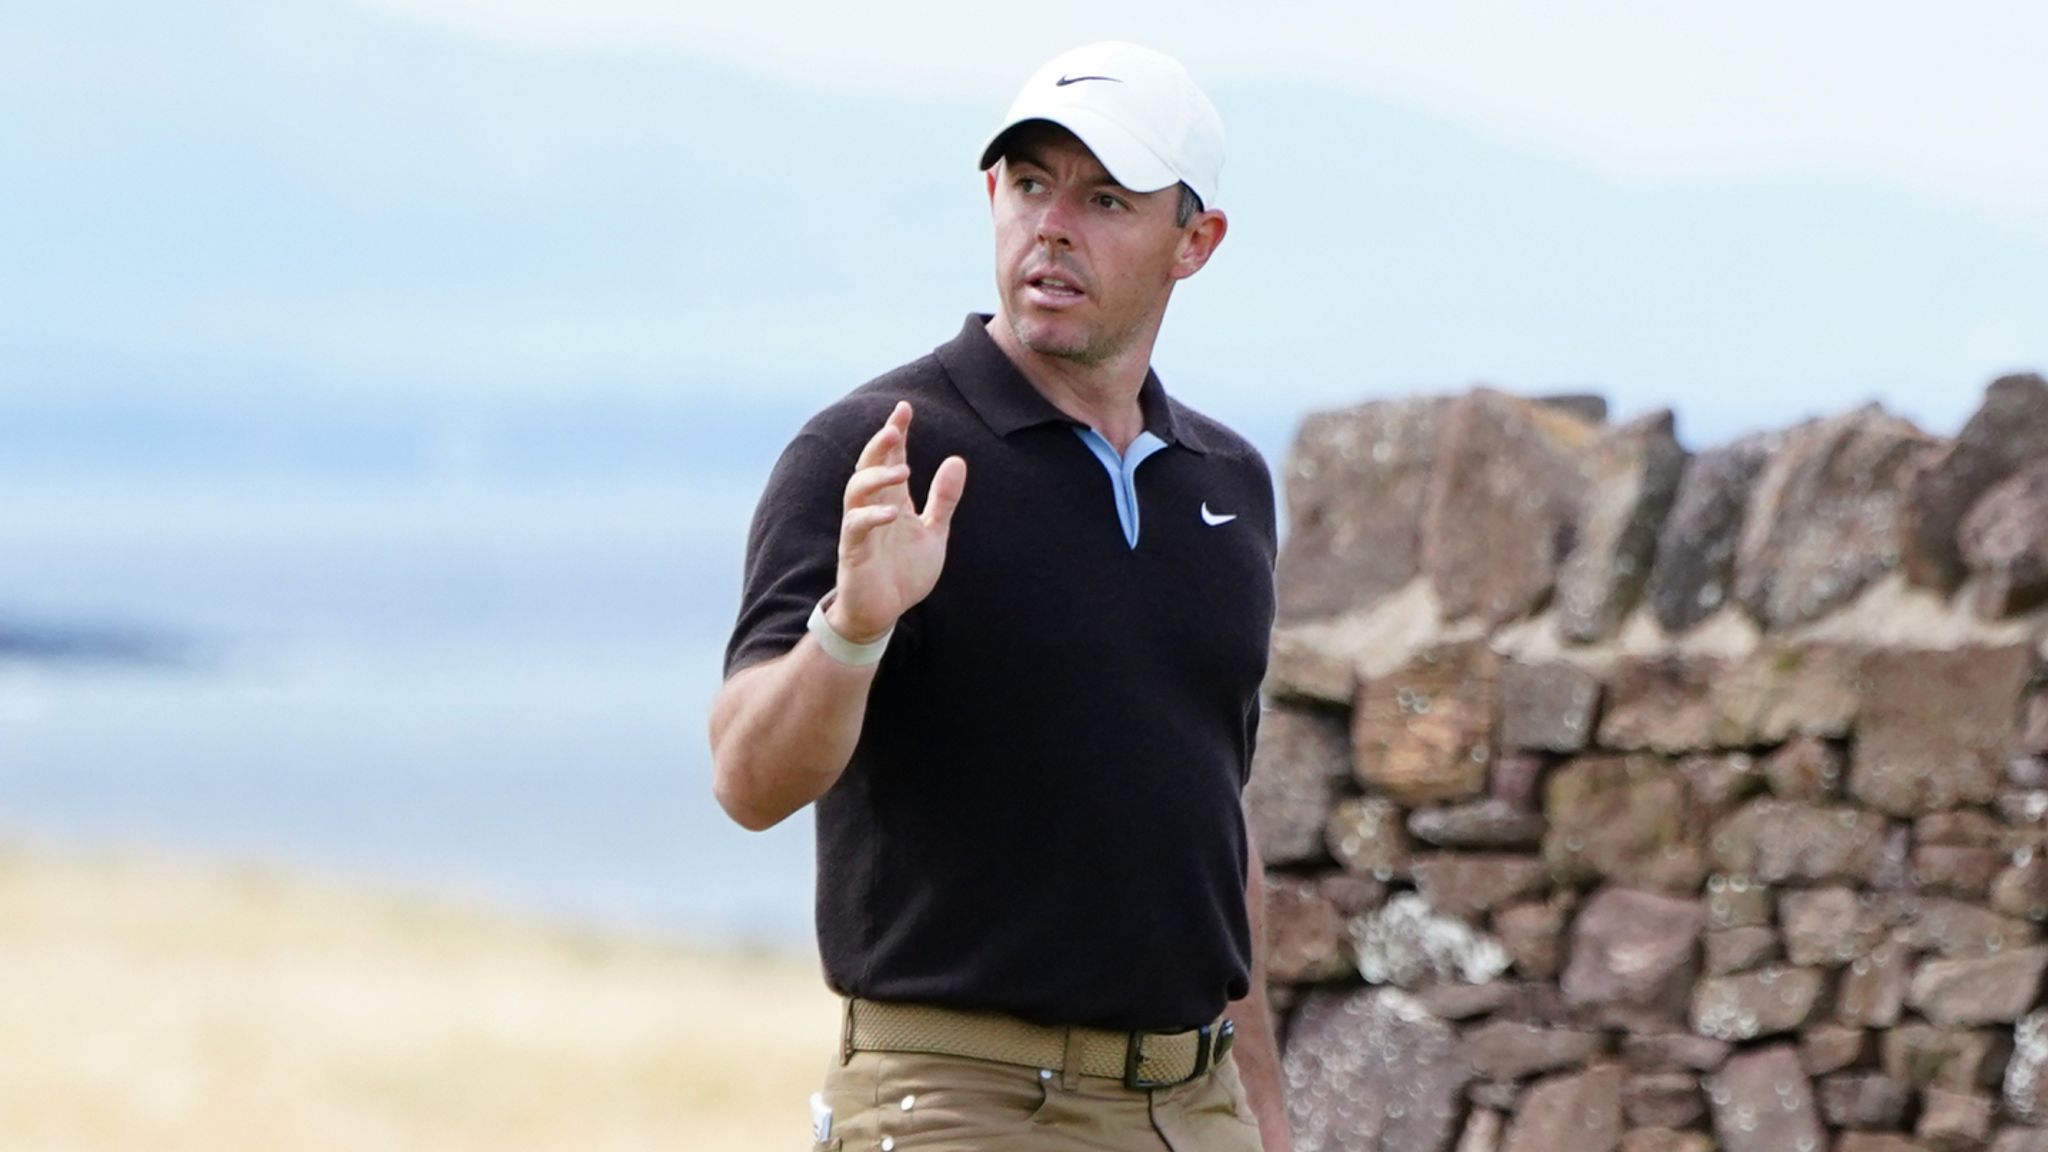 Genesis Scottish Open Rory McIlroy takes lead into final round and admits Scotland win long overdue Tommy Fleetwood moves into contention Golf News Sky Sports